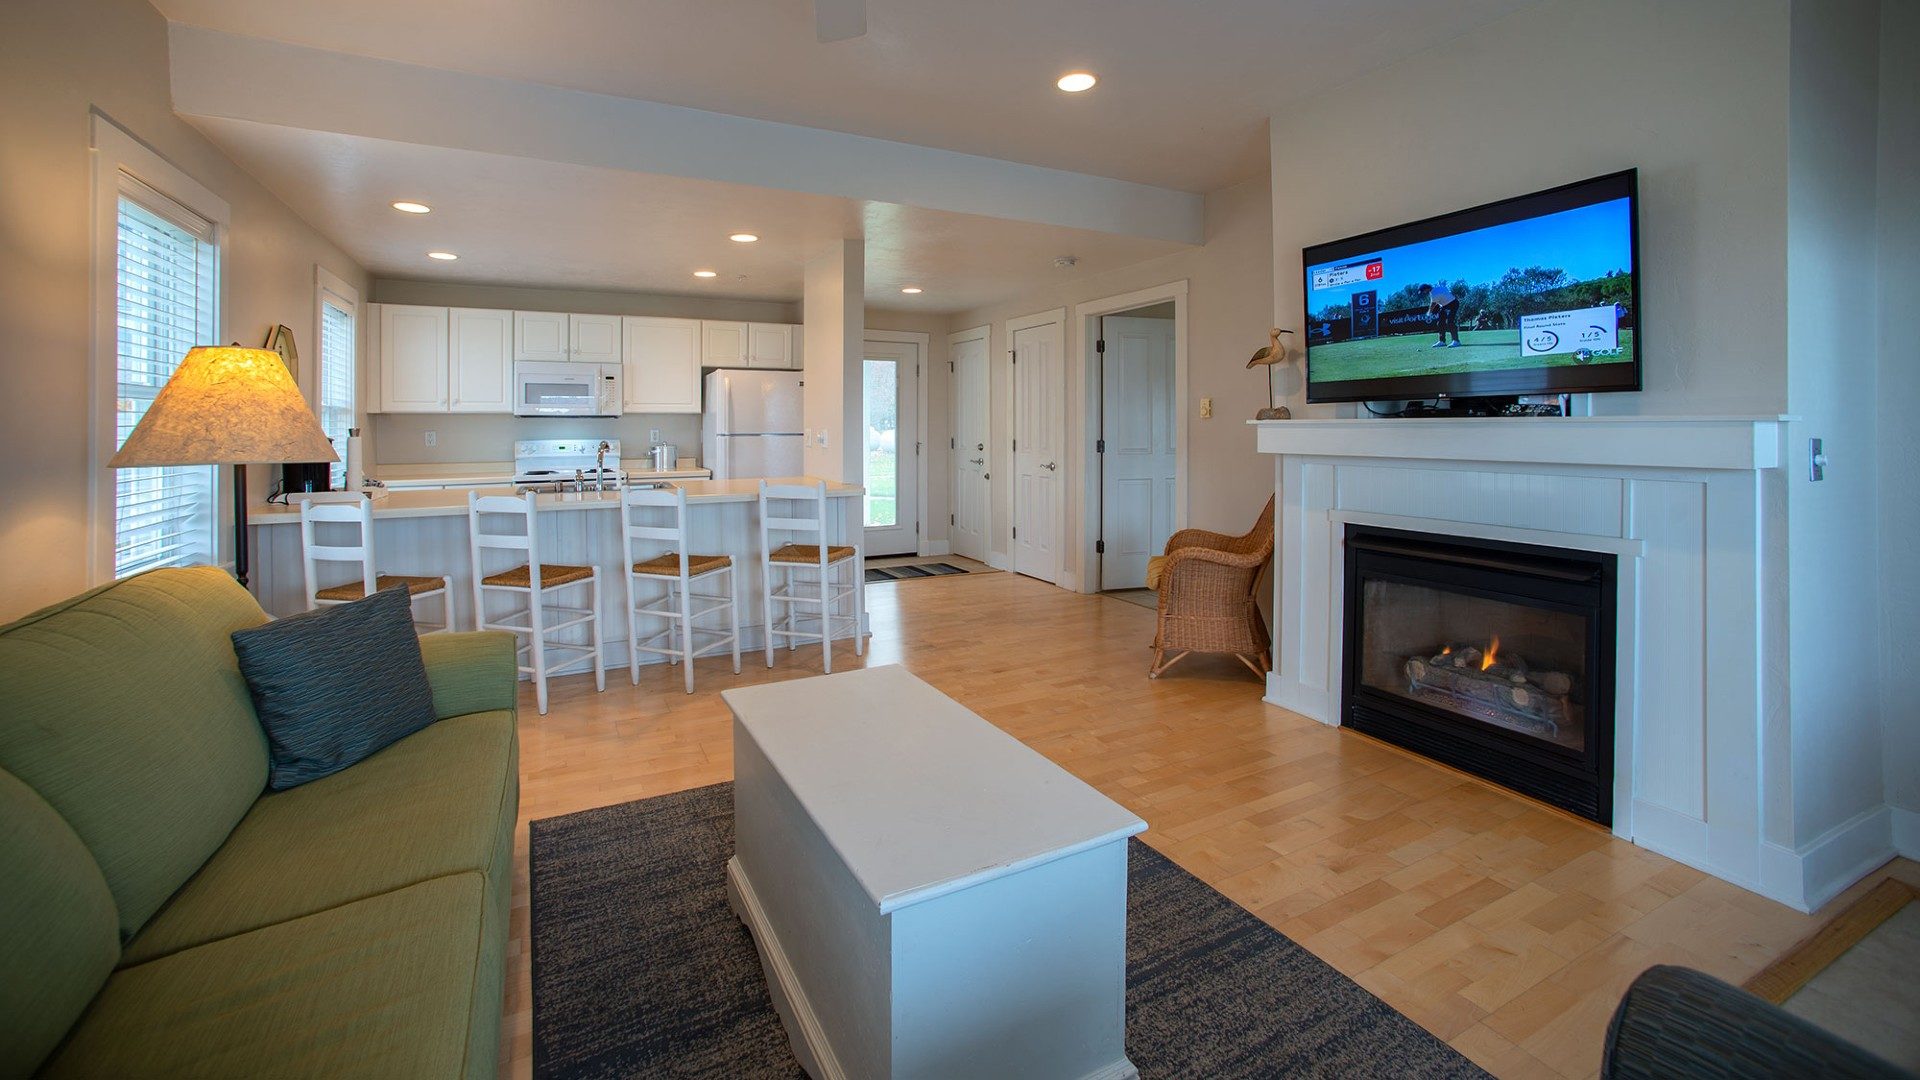 Suite showing a kitchen area, green couch with coffee table in front of a TV and fireplace